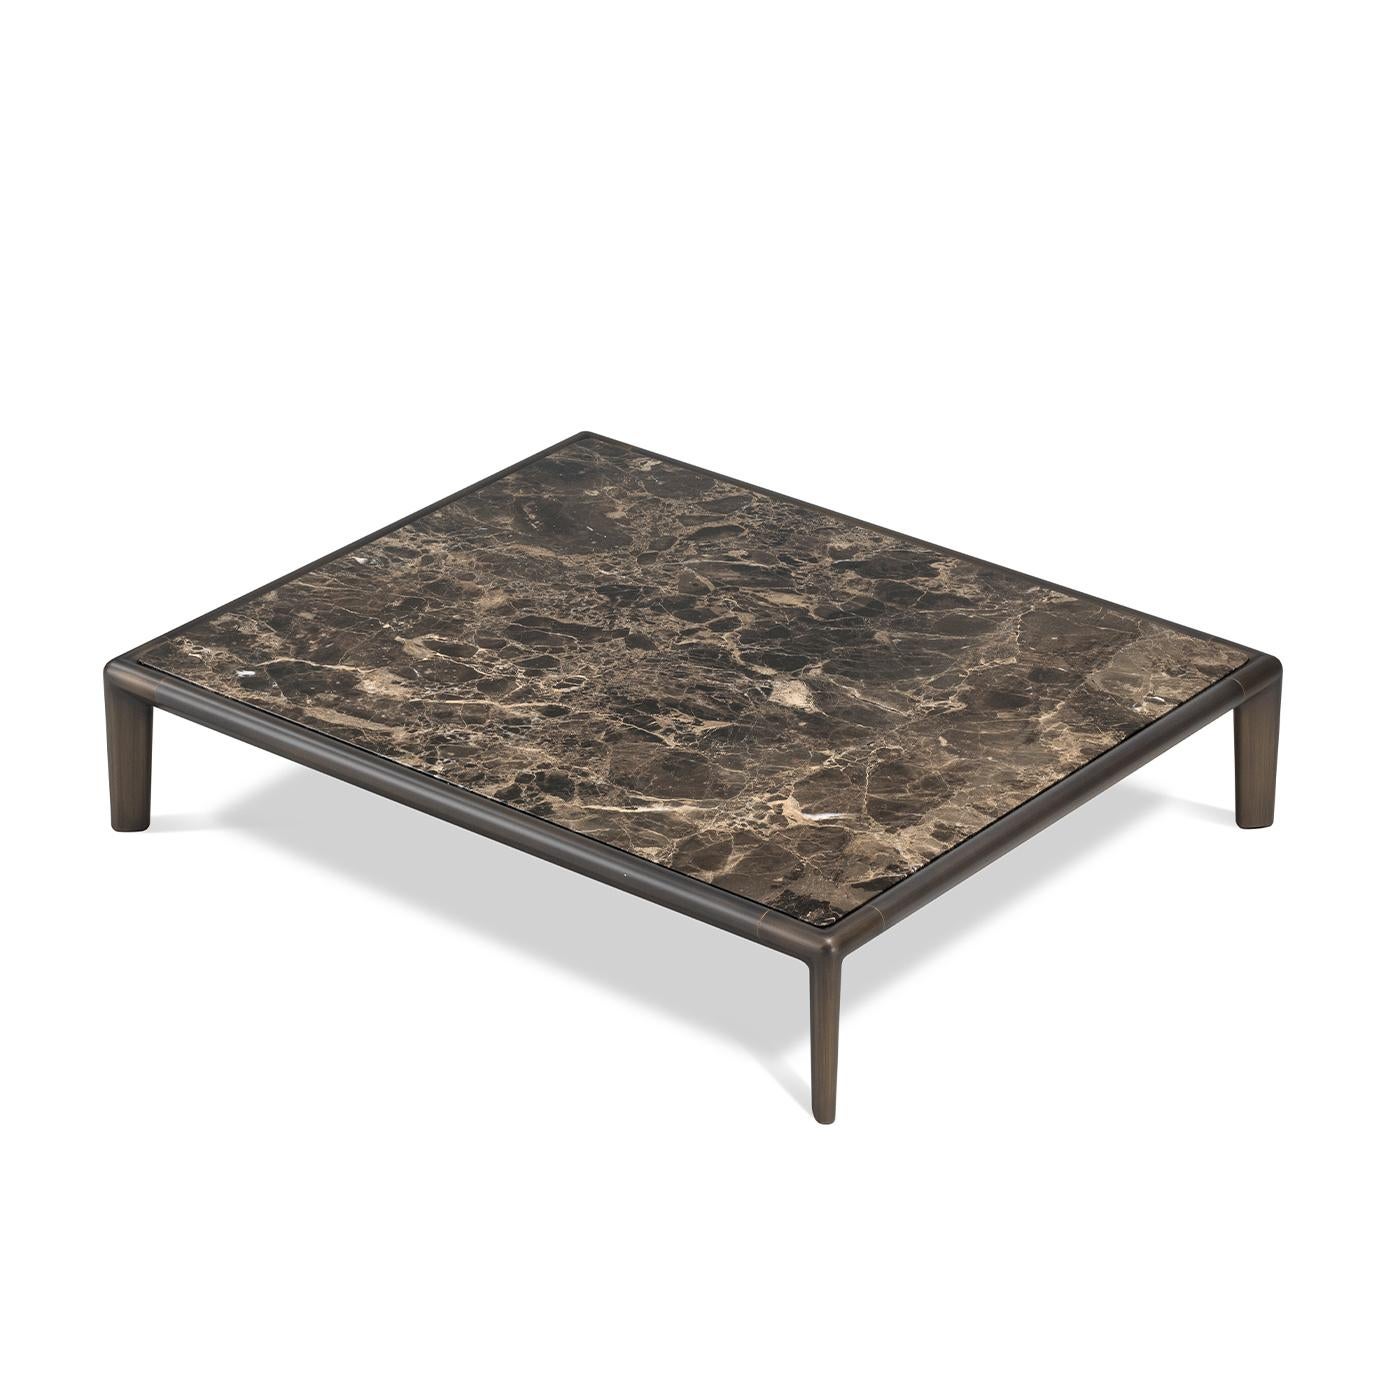 Best paired with the plush modern sofa from the Ghidini catalog for a refined, coherent designer look, this rectangular coffee table is distinguished by a sleek structure ennobled by the presence of a prized tabletop in Dark Emperador marble,